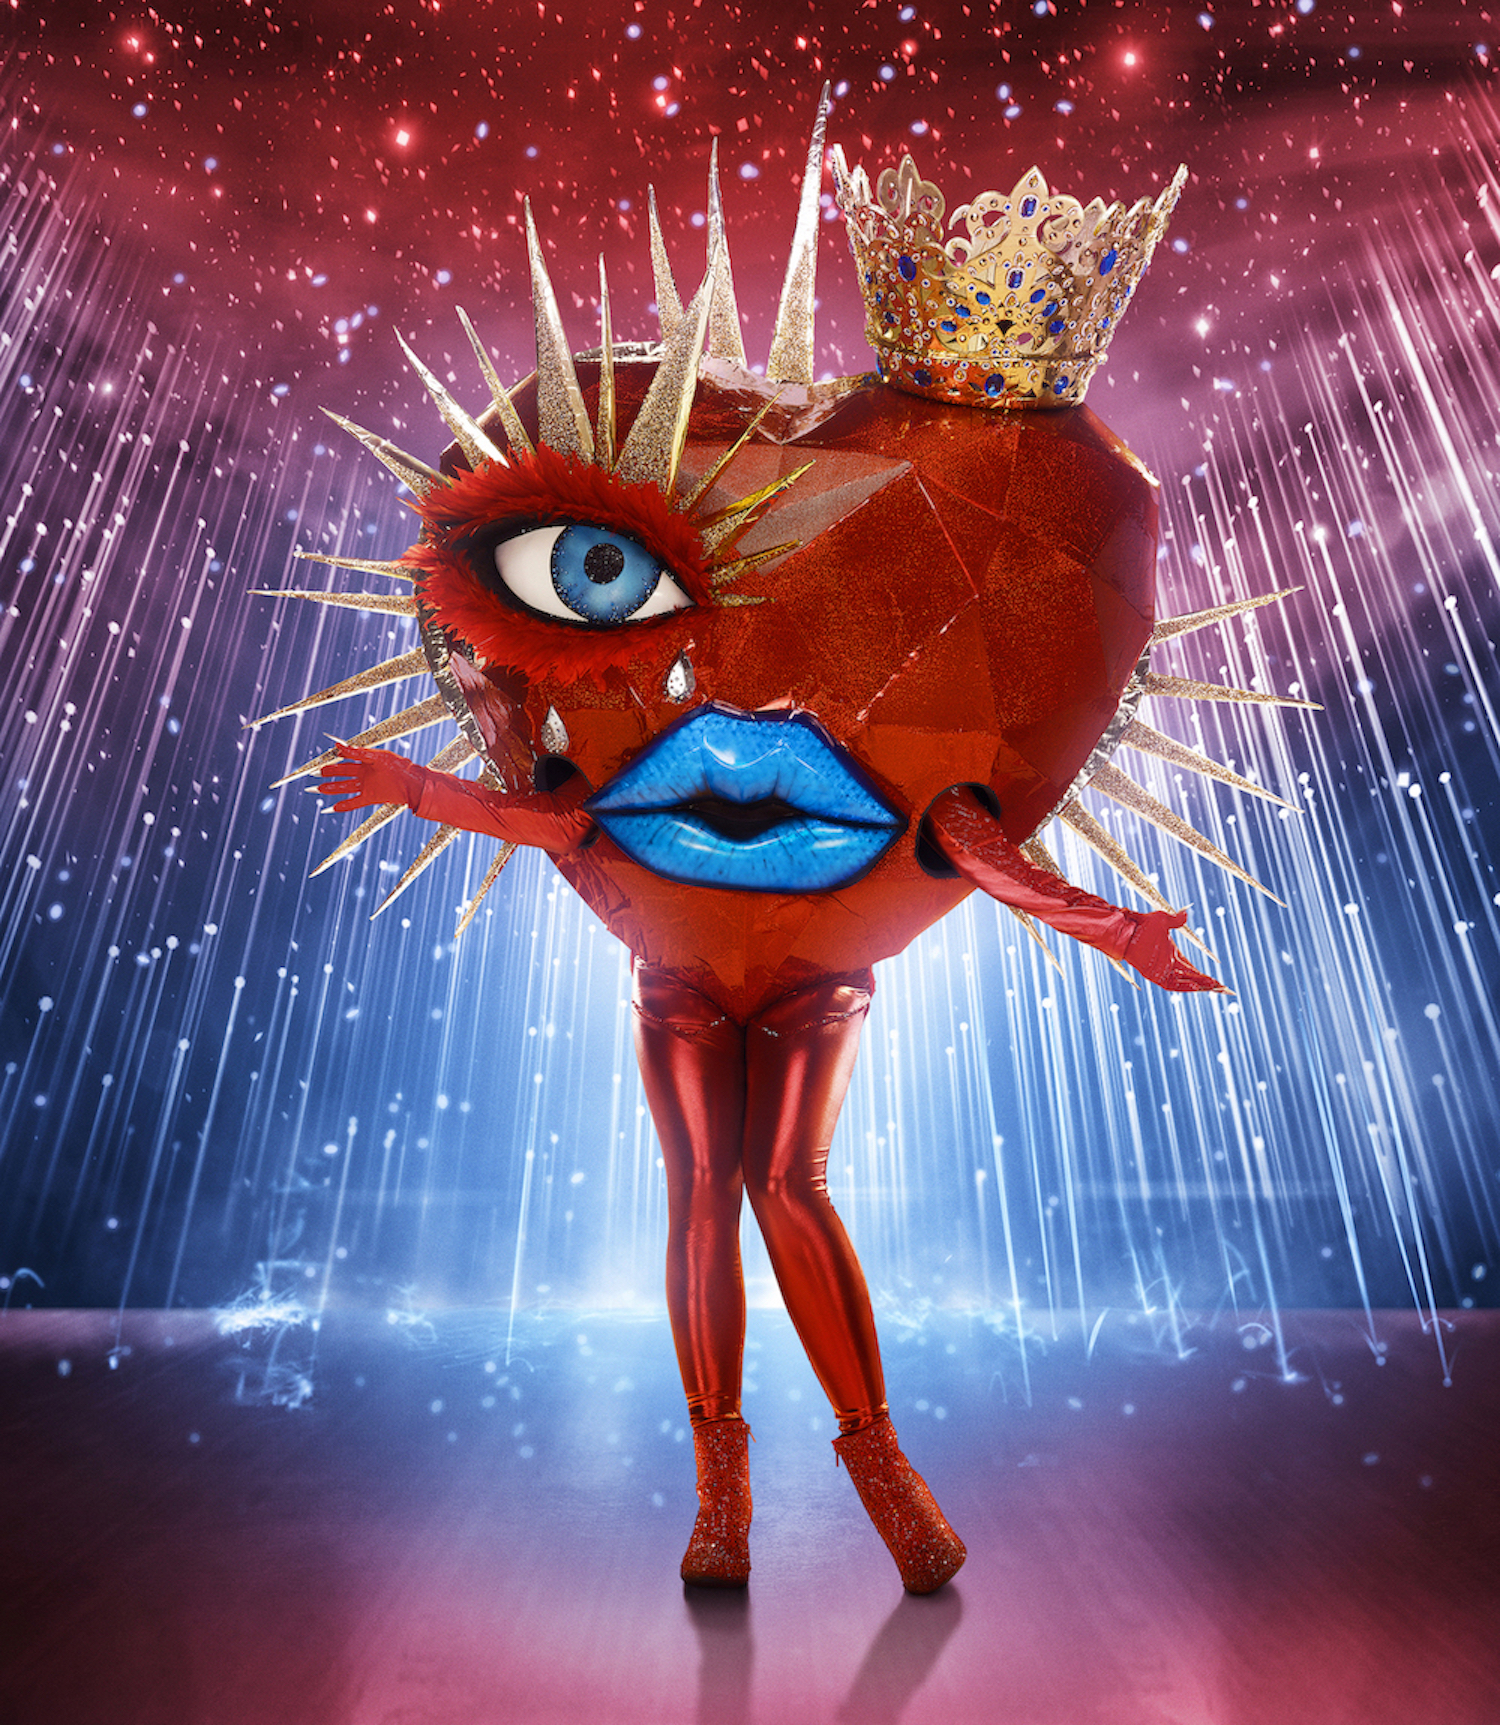 'The Masked Singer' Season 6 Costume Queen of Hearts